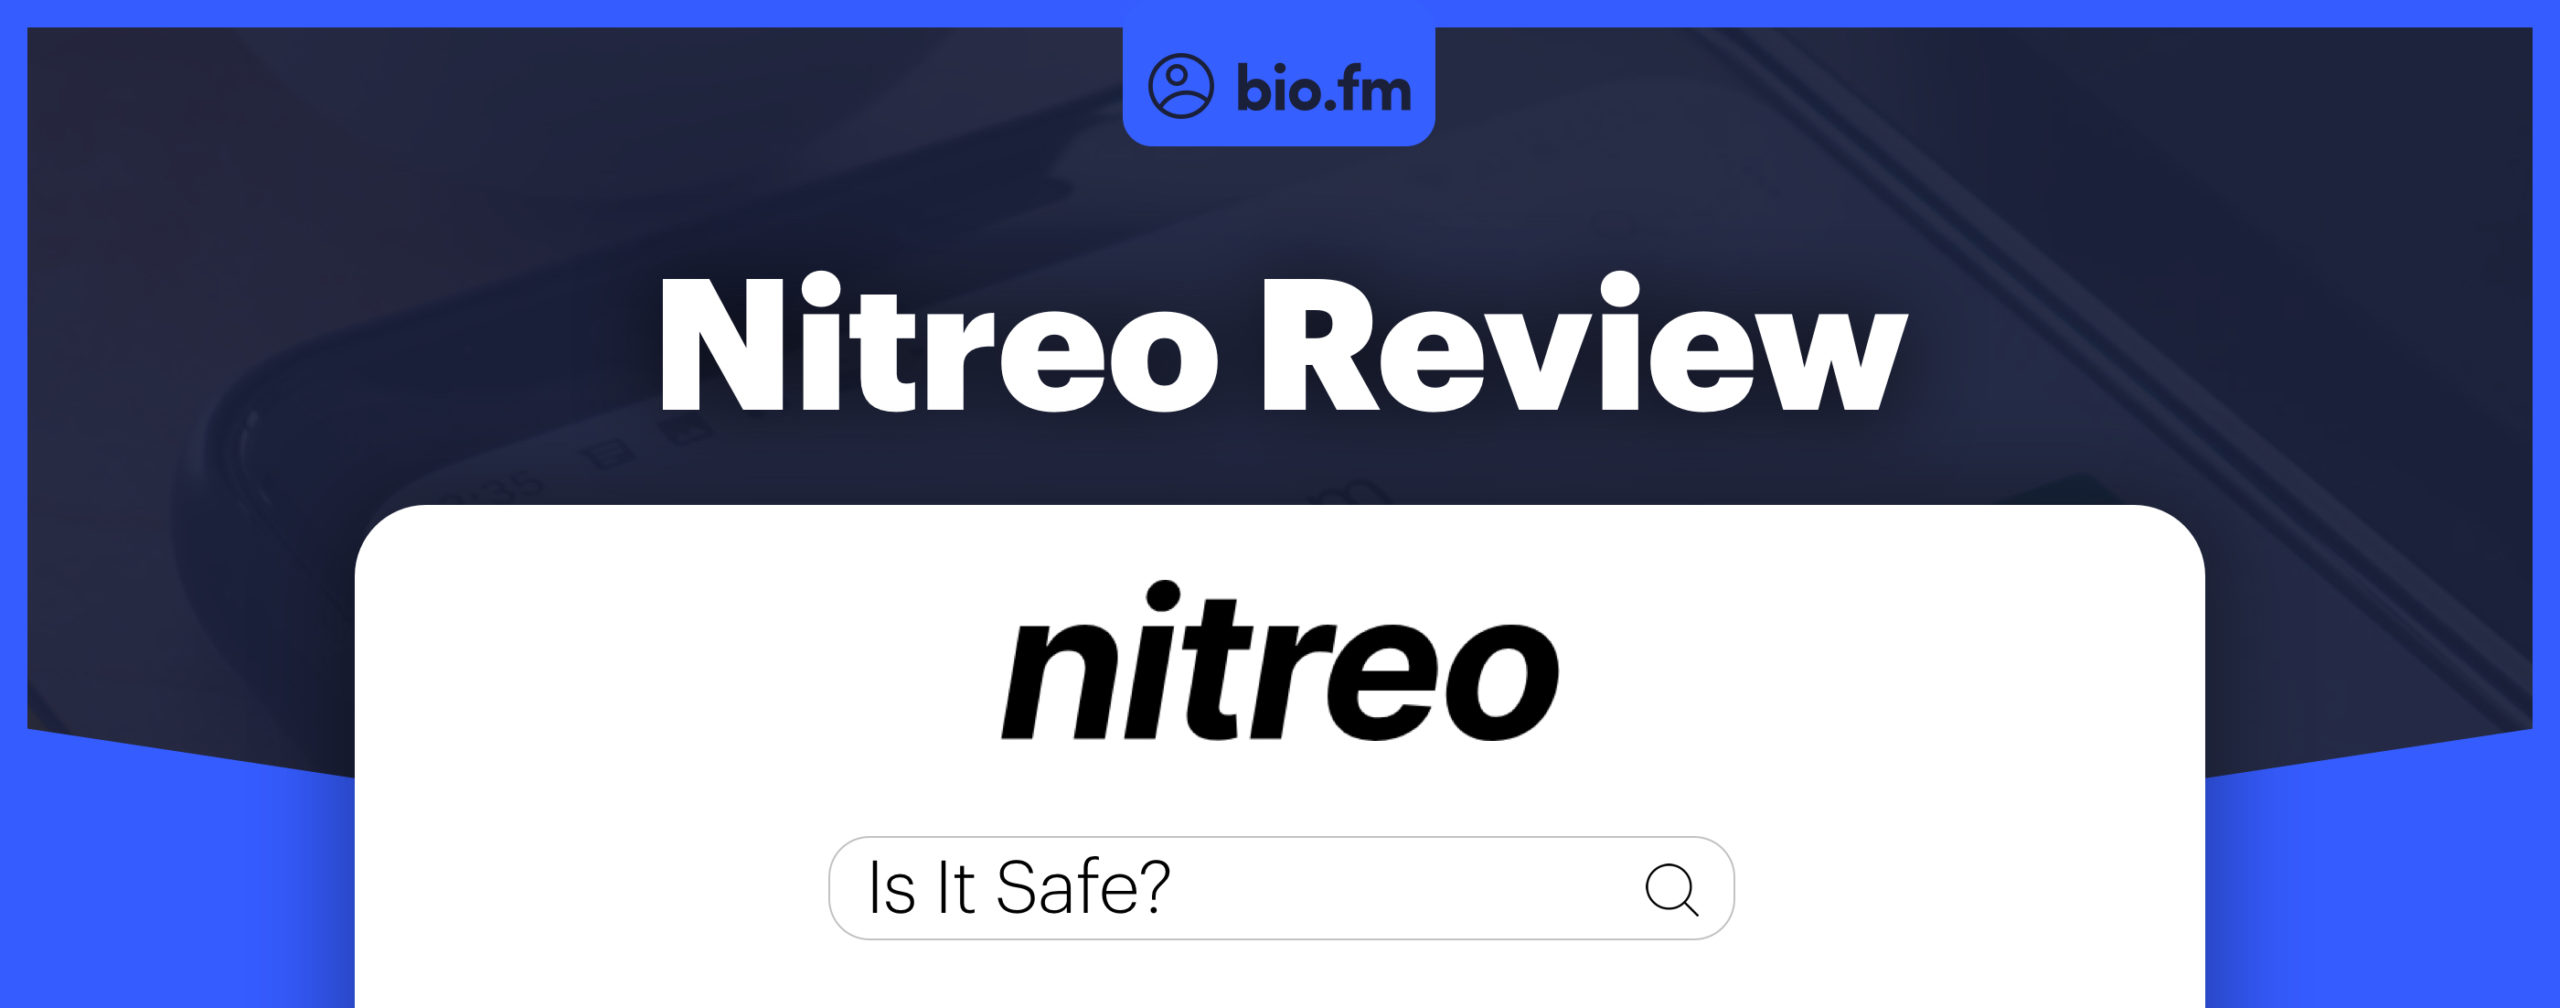 nitreo review featured image